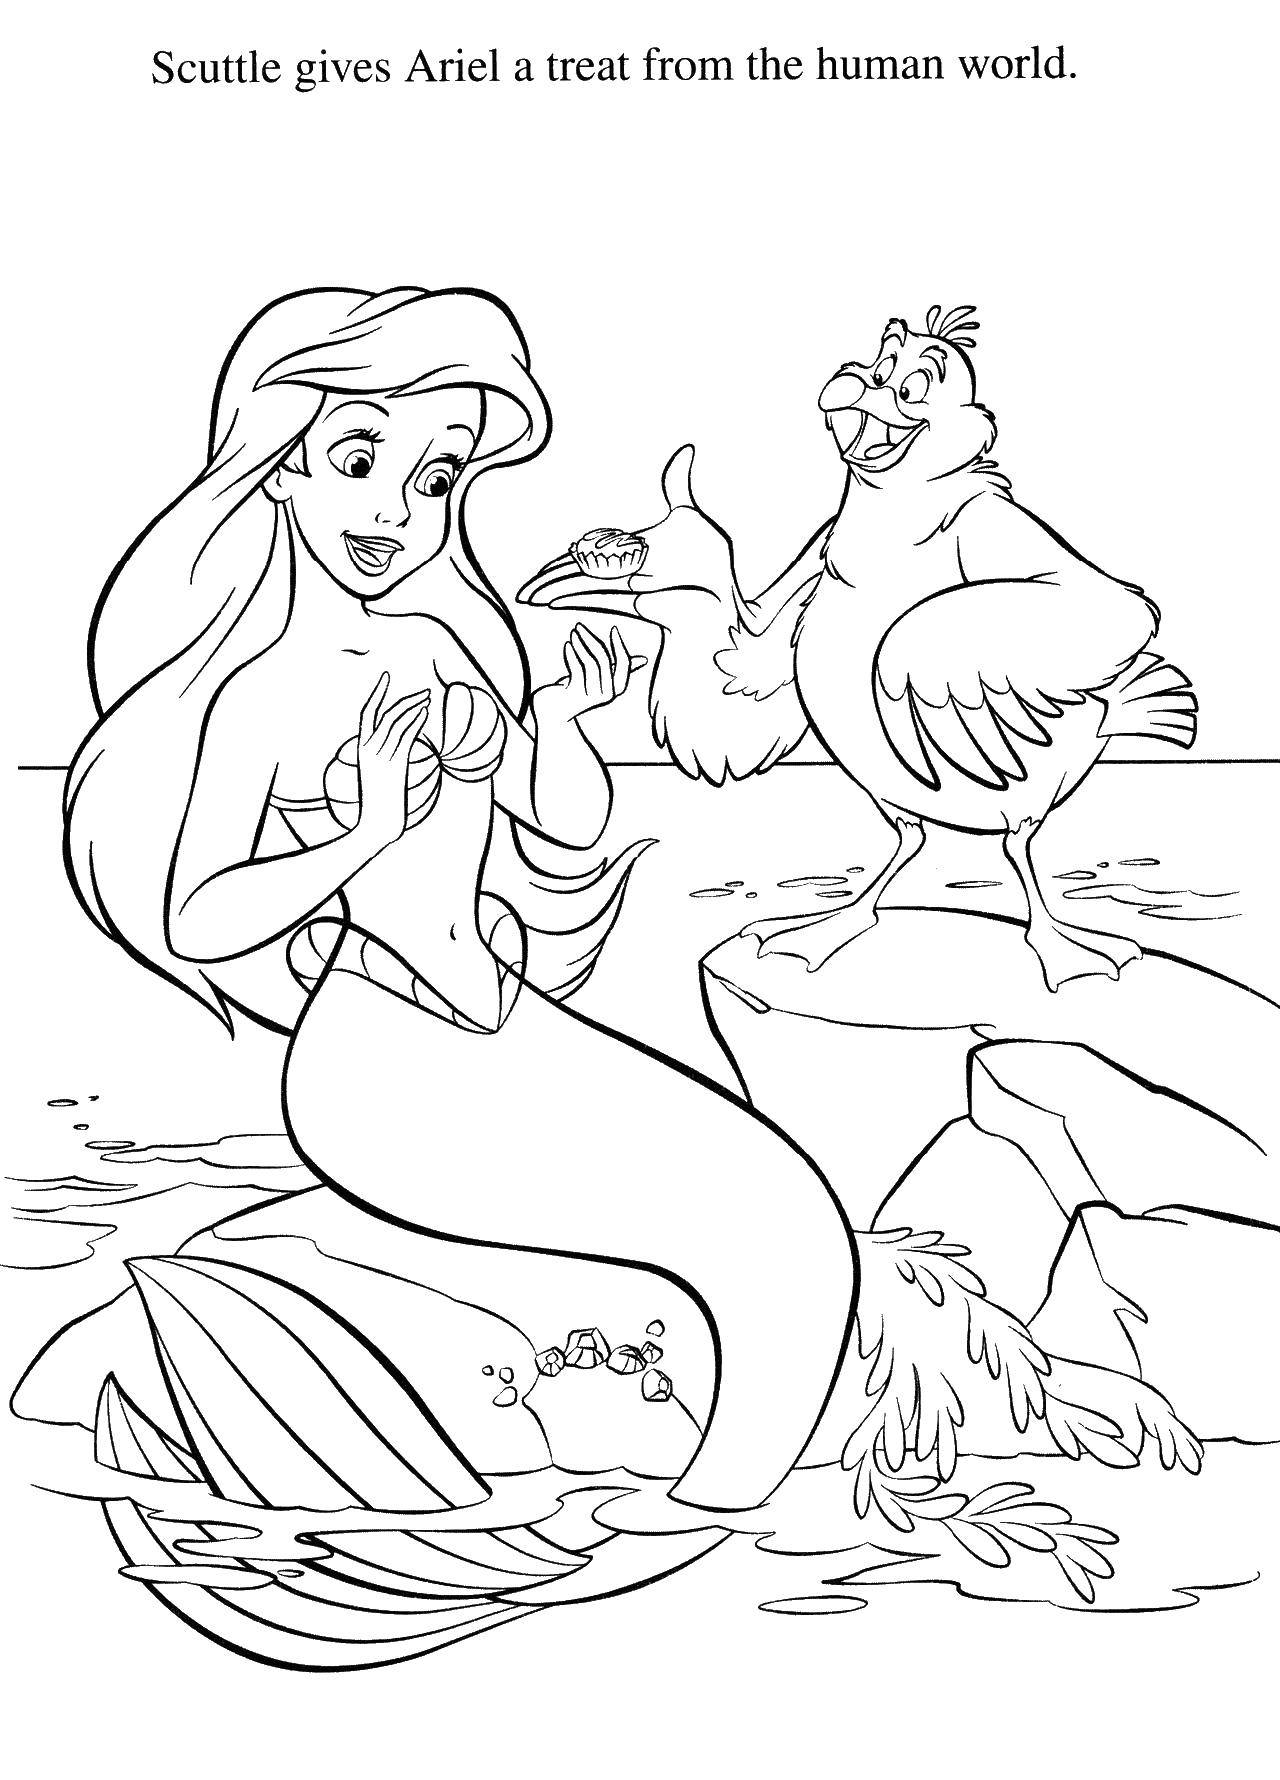 Coloring Ariel can live in the human world. Category The little mermaid. Tags:  Disney, the little mermaid, Ariel.